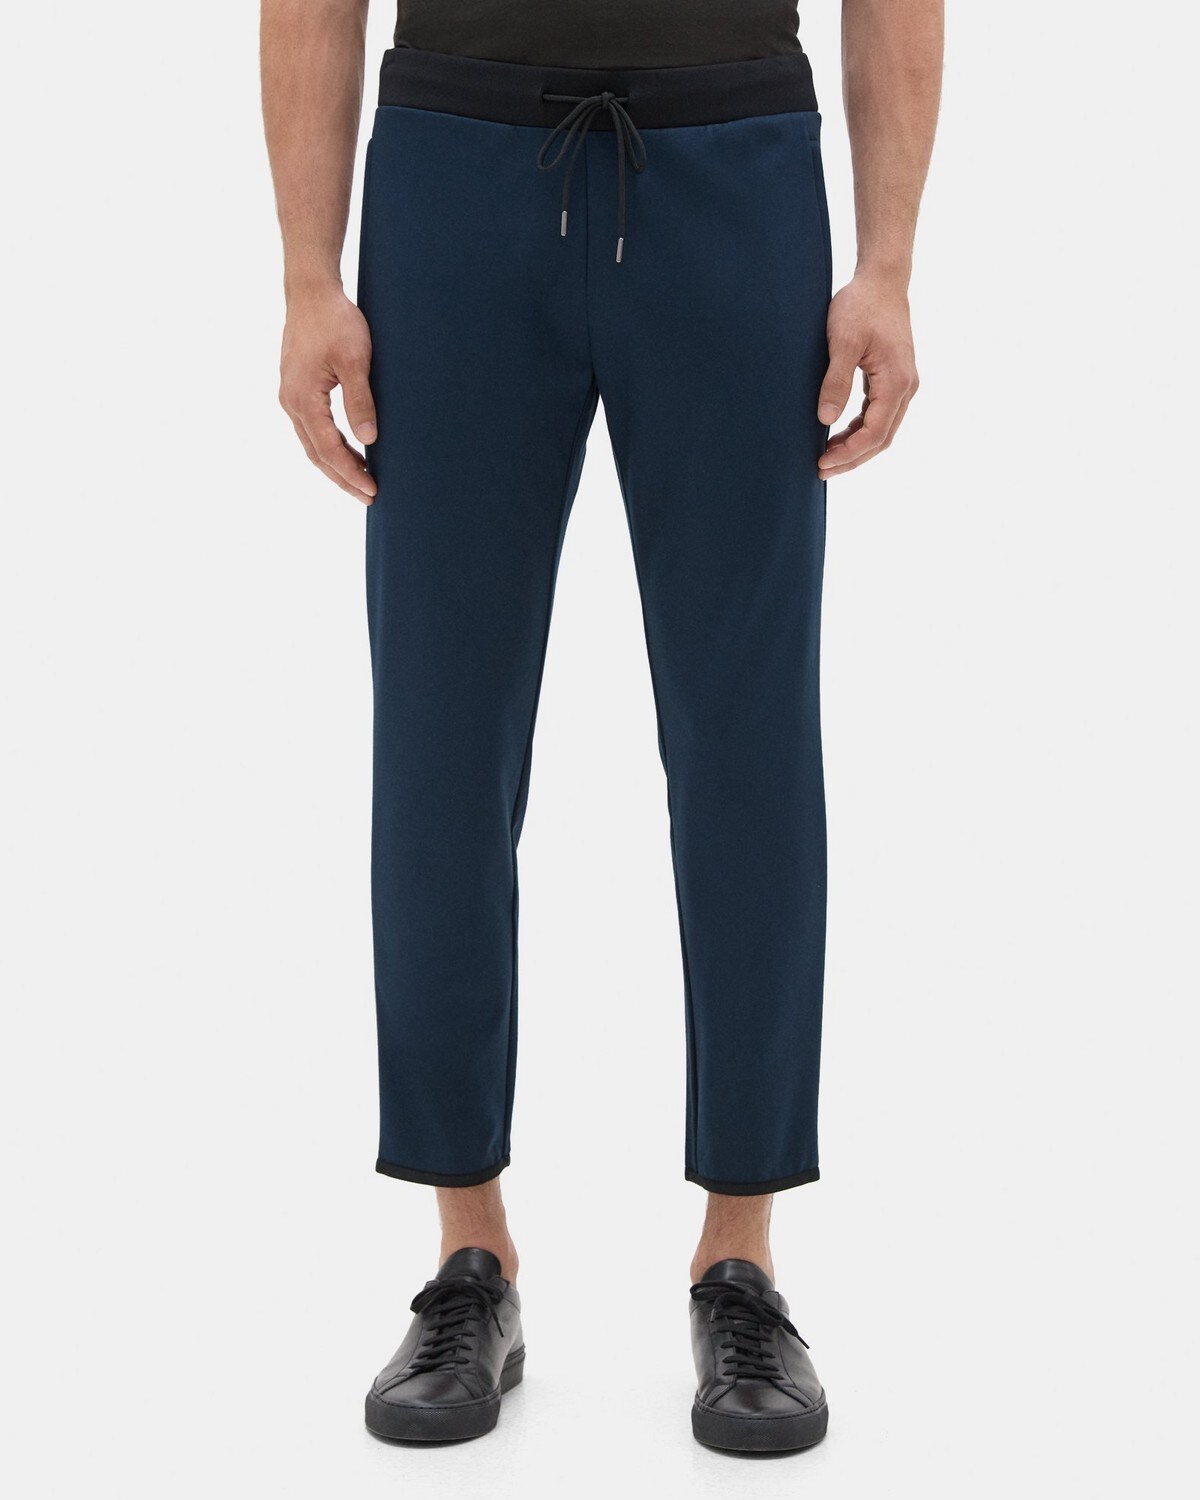 Jogger Pant In Stretch Tech Knit